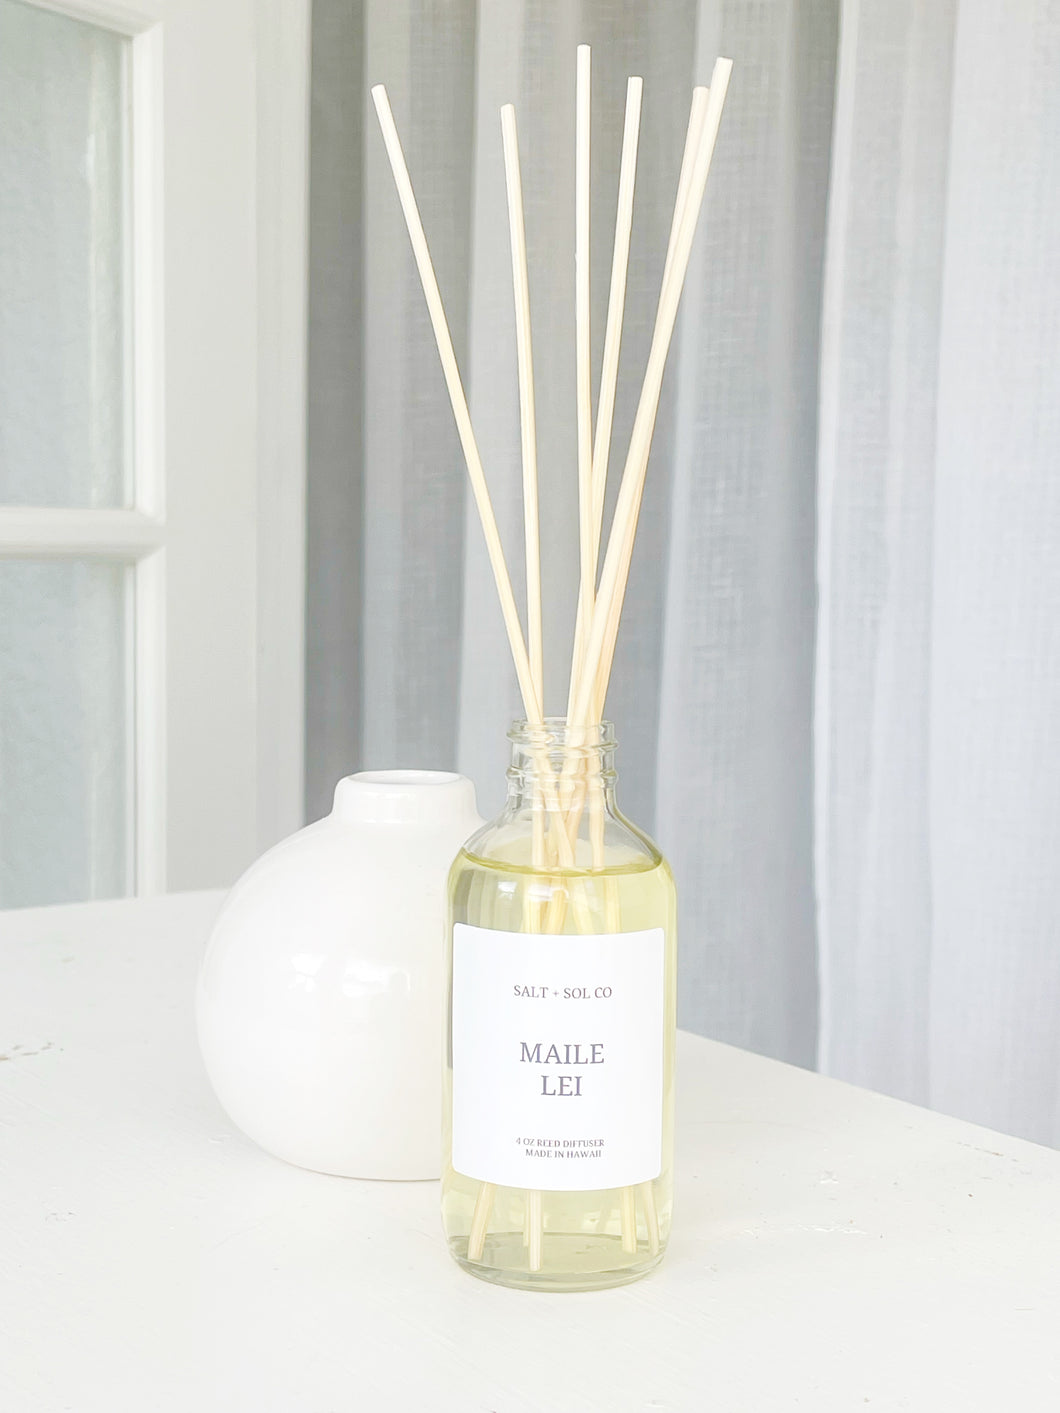 Shop Maile lei scented reed diffuser oil hand poured in Hawaii at salt and SOL co 